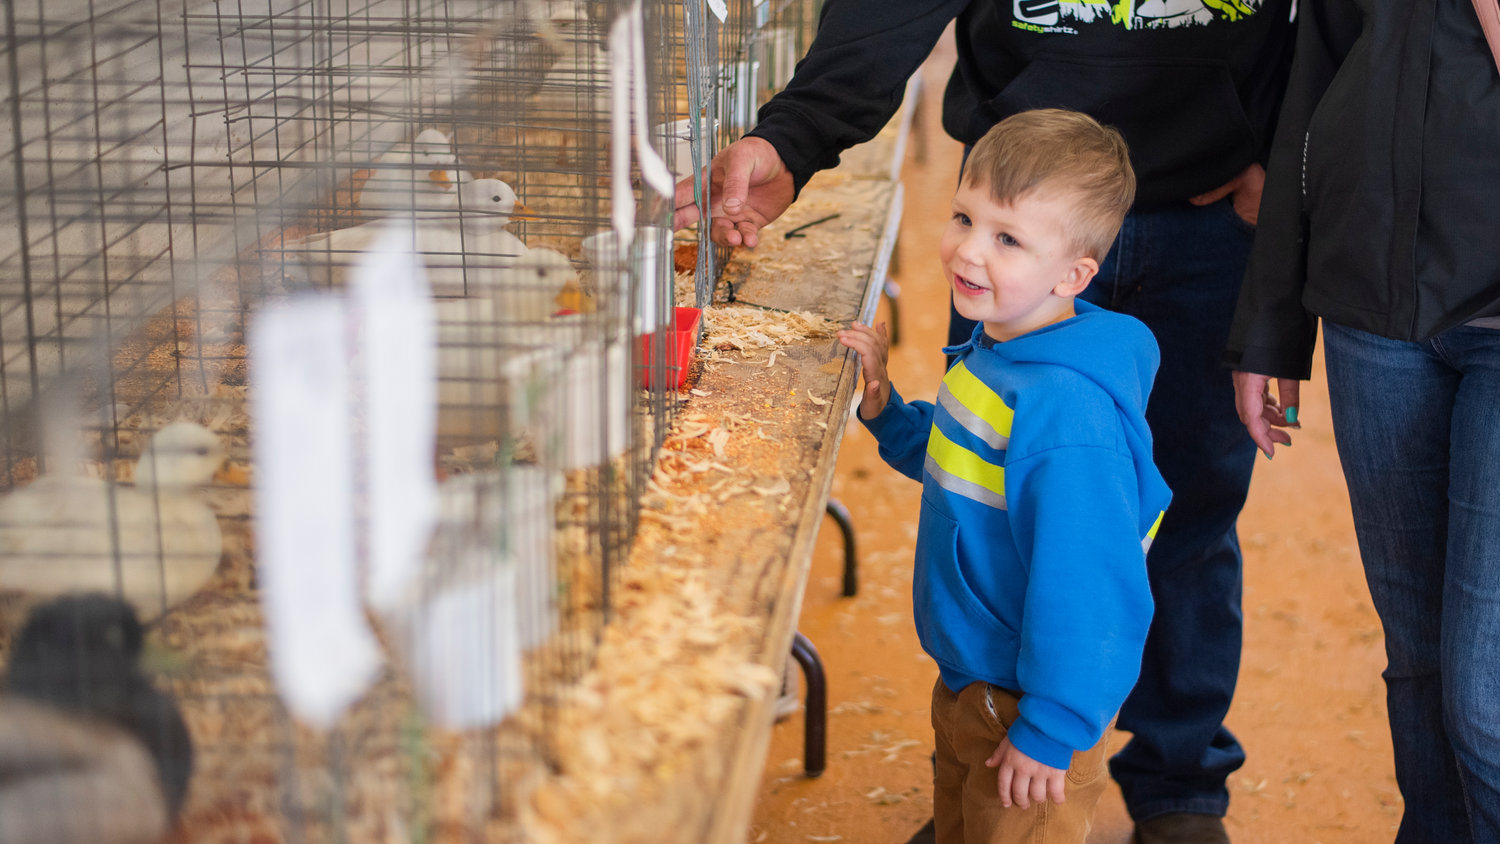 Jayce Burdick, 3, smiles while looking at ducks during the Spring Youth Fair in Centralia on Saturday at the Southwest Washington Fairgrounds.